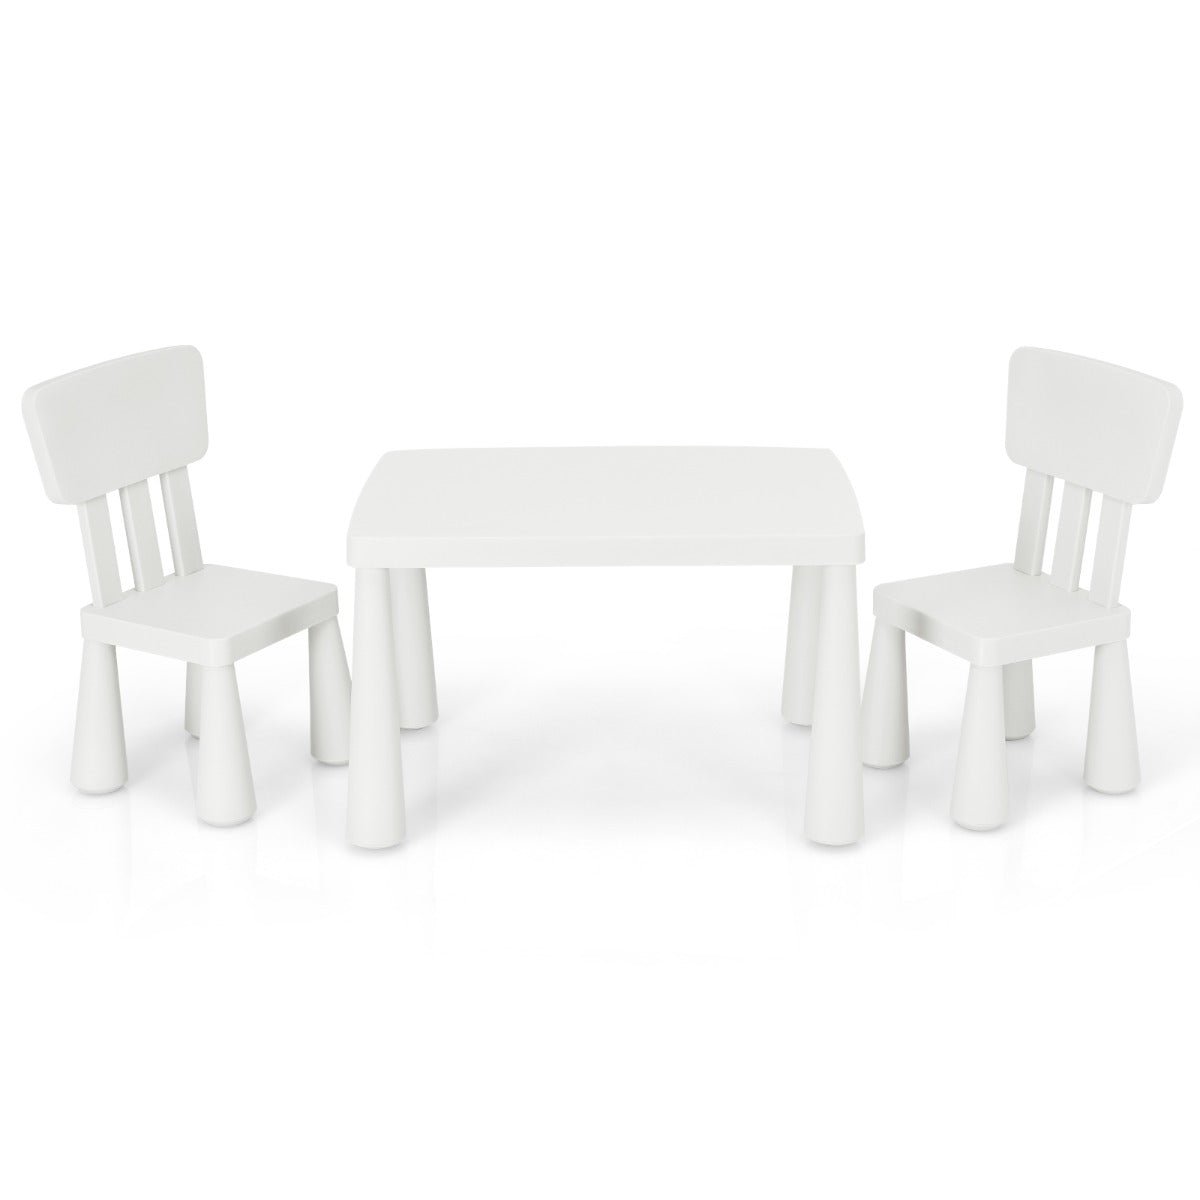 White Kids Table Set with 2 Chairs - Inviting Reading Nook